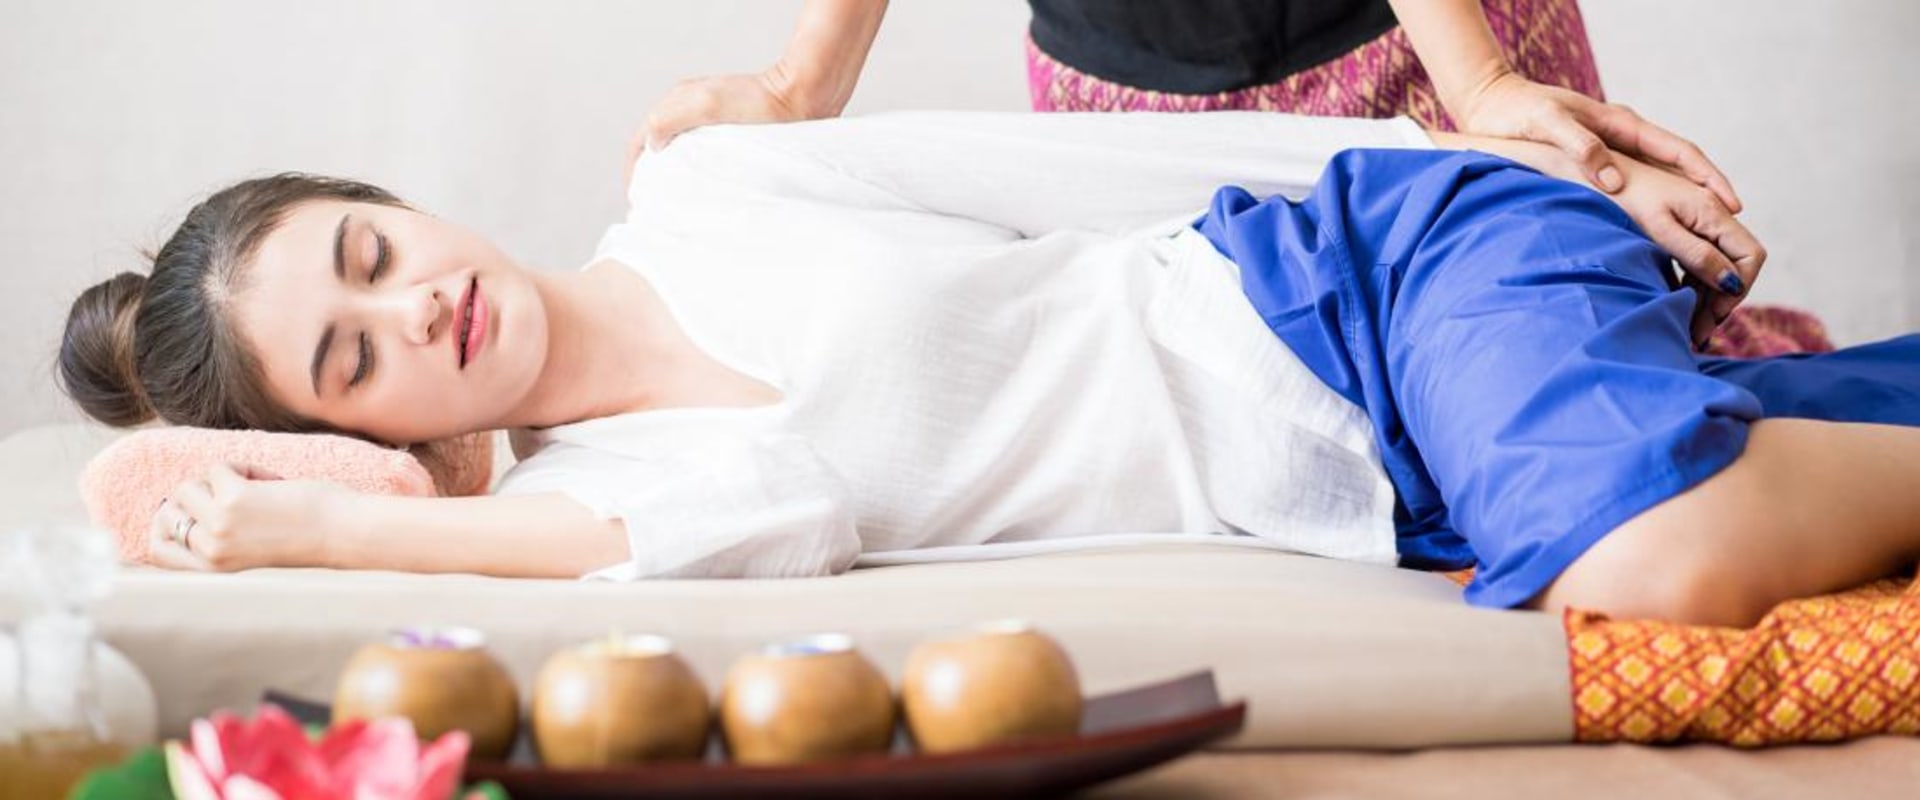 Who Should Avoid Thai Massage and Why?